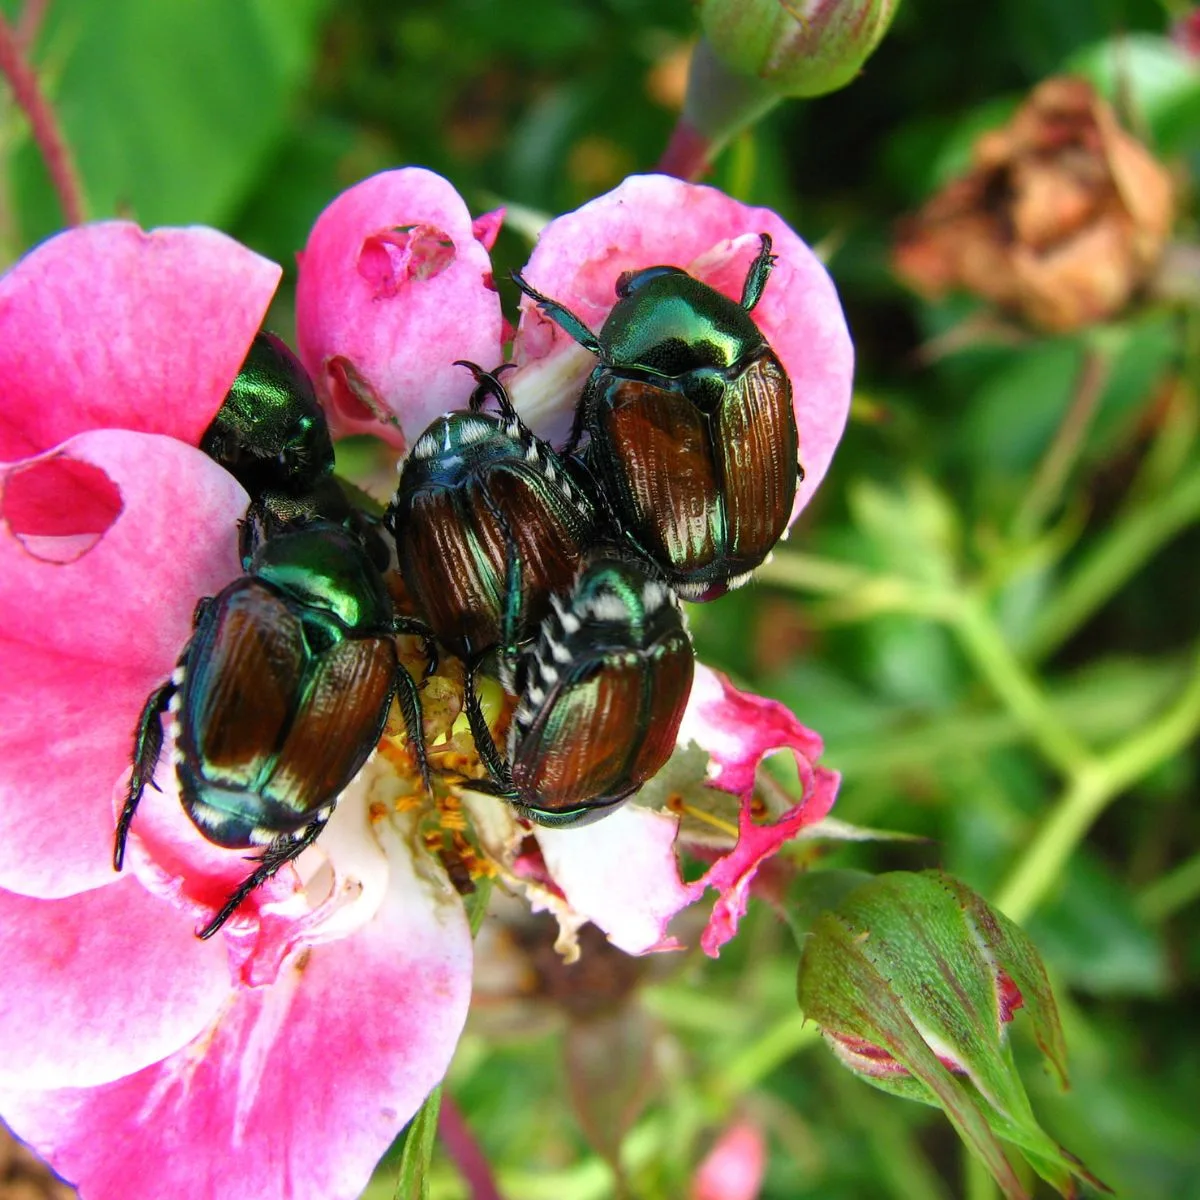 A bunch of Japanese beetles on a pink rose.